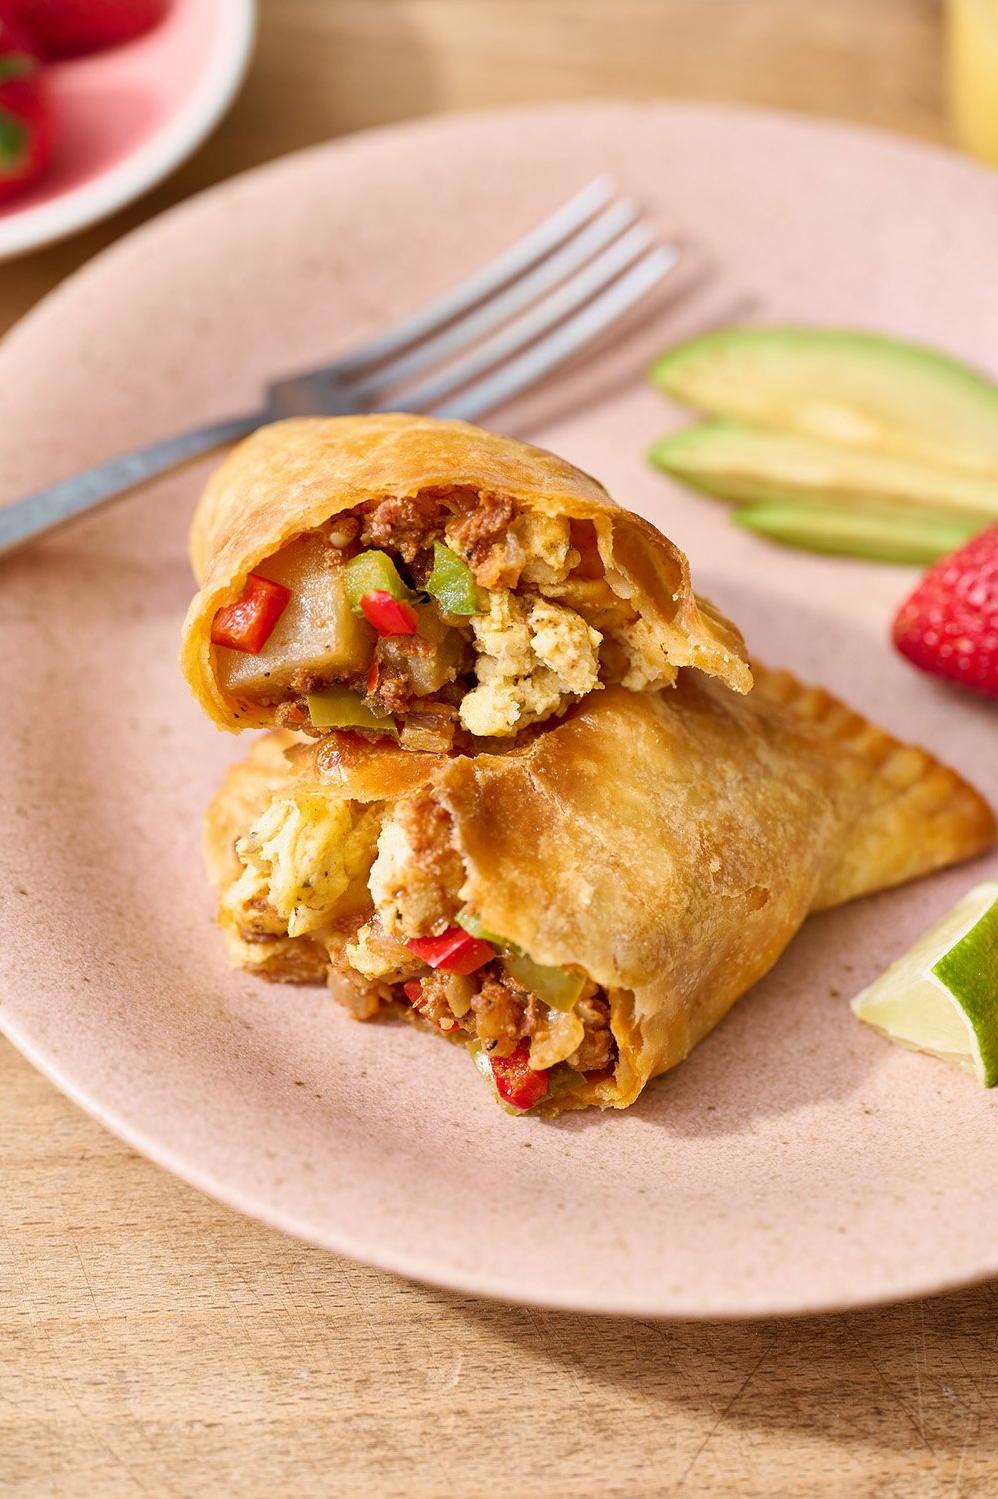  These empanadas are not just tasty but also visually appealing